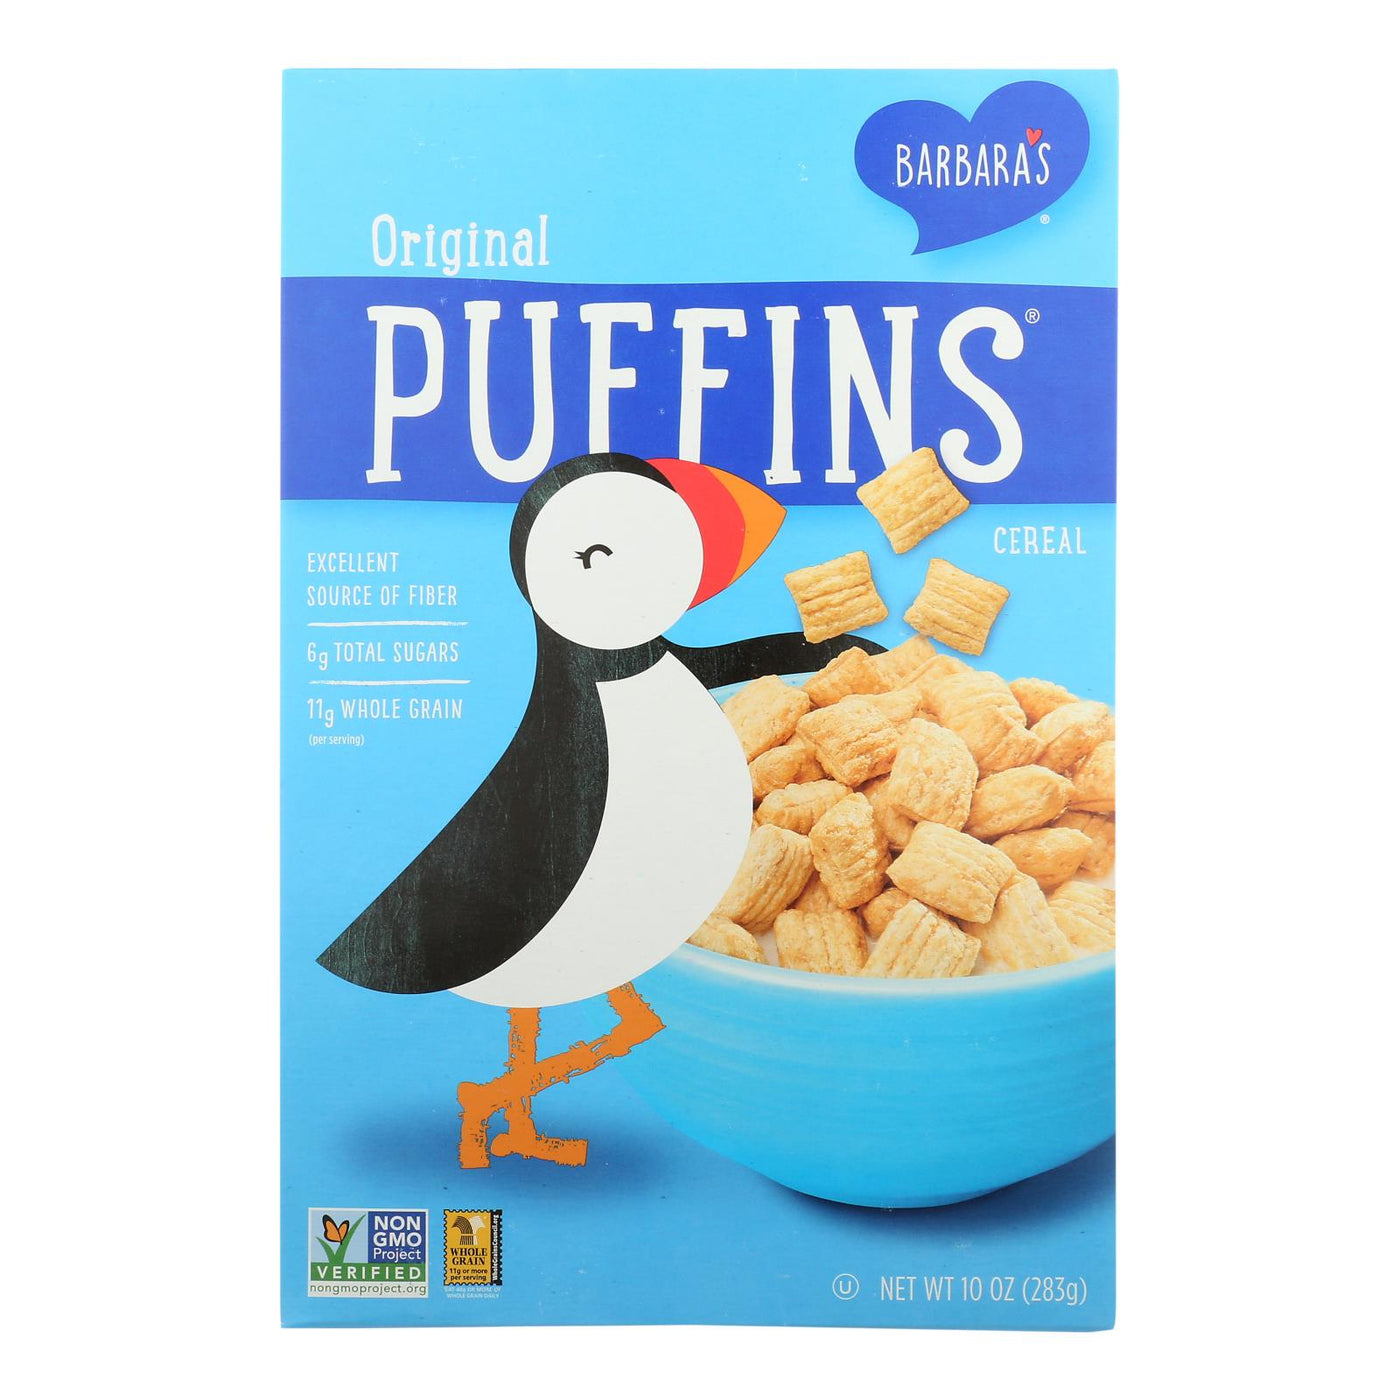 Barbara's Bakery - Puffins Cereal - Original - Case Of 12 - 10 Oz. | OnlyNaturals.us